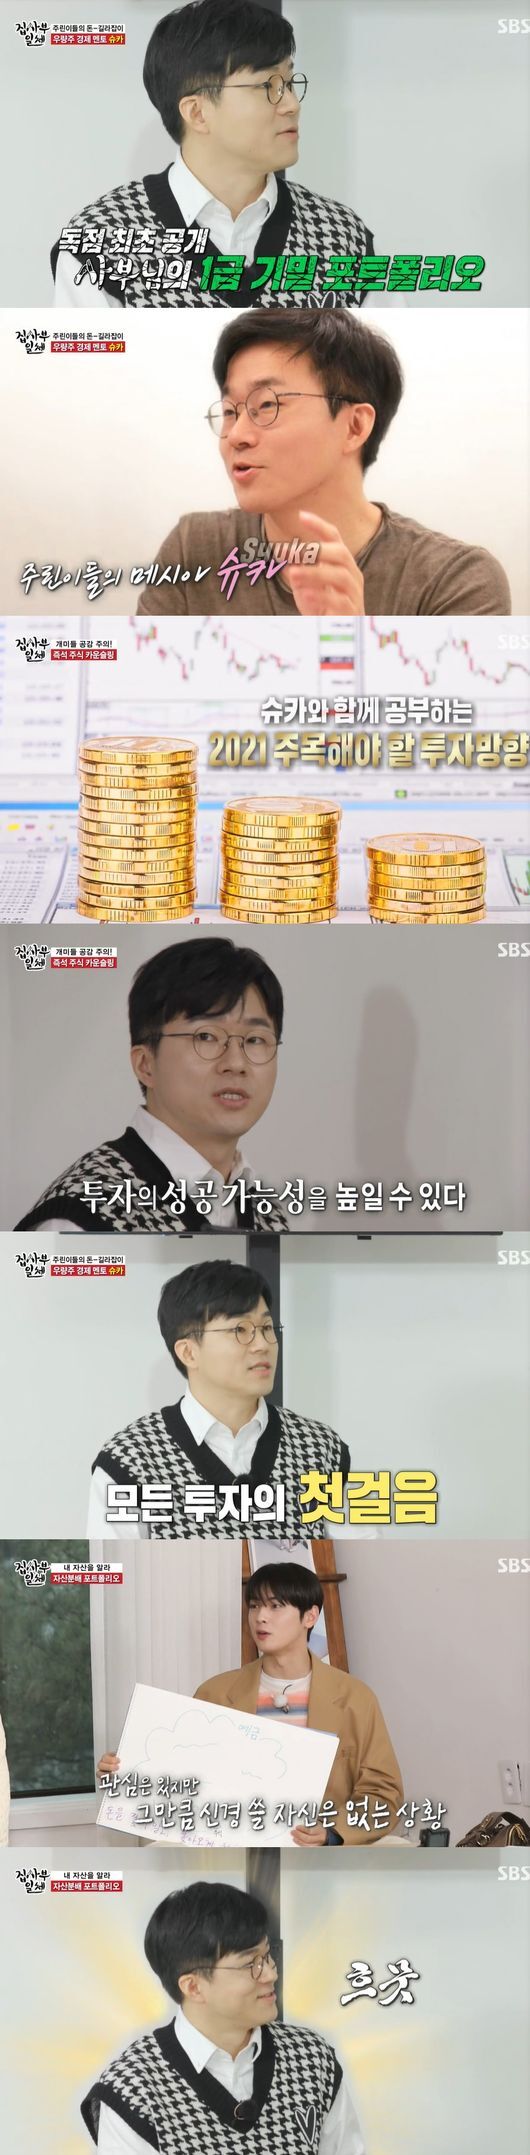 In All The Butlers, Syuka played SyucraTess, transferring the secret of stock investment with gold flowing.Lee Seung-gi, among others, has become a smart man.Syuka appeared on SBS entertainment All The Butlers broadcast on the 28th.On this day, the production team mentioned the hot keyword that focuses on 2021, and the production team introduced the visiting master who will inform the smart investment method that the 2021 Korea hot keyword will walk the money of the people as the financial investment line.It was the best Indiamento Syuca. From the beginning, I was curious about Syuca, who is working as an India YouTuber.Syuka said, There are a lot of people who live when they rise, prices rise and fall, and if they move by looking at prices, it is natural to be trapped. We should consider the vision of a long-term company, not a short-term price.In the meantime, Syucar decided to release his portfolio, which he had never disclosed to Winners & Losers, portfolio.Syuca then said, Know my asset allocation well as the first step in all investments: I had to know the asset allocation table and think about my property.First of all, regarding safe assets, he said, There are low-risk financial assets, gold, deposits and bonds are safe assets. Risk assets mentioned stocks and funds such as real estate, which are highly volatile.If there is no safe asset, there is a risk that the asset has already been halved and there is no measure and only waiting for recovery.In the end, asset allocation protects me from Danger, he added, adding that he should prepare for Danger by expanding safe assets.I looked at the members portfolio: Lee Seung-gi had the largest deposits and had adequate distribution of personal pension assets such as real estate.Syuka said that Lee Seung-gi is a typical portfolio of rich people, and that it is a good place for stable and stable portfolio, which has a high proportion of deposits.Stocks are not short-term speculation, but long-term investment, Syuka said. We should pay attention to the future vision instead of the current share price of the company, which can increase the possibility of investment success.If John Berr does not have unconditional gains, we should see if social change and corporate direction coincide with each other when choosing stocks, he said. If the direction does not match, John Berr can hit the bottom in a few decades.I decided to drive Bunger to learn about the direction of investment that should be noted. I directly explored the so-called gold vein.Syuka said, It is a must when we talk about stocks. The direction of investment to focus is climate change and environment-friendly.Syuka said, What is the industrial change due to climate change? He said that he should focus on investment in line with the move.As the hottest field in this change, Syuka said that it is a battlefield and is growing interest in parts business to enter electric cars.Syuka said, Good investment is to recognize social change and judge accordingly.As the next eco-friendly trend, Syucar said, It is a ship that is closer to the present. Syucar said, In 10 years, prices should rise and you should have a habit of observing change rather than investing immediately. It is imagination to make investment one step ahead of social change.Syucar continued to say, The topic of attention from all over the world is digital conversion. With familiar digital technology, we should mention QR code and pay attention to it because everyday life is digitized at a rapid pace.Syuka, who said, Imagine the blue ocean field, said, We have to judge exactly who Winners & Losers rather than rushing unconditionally. He said, We should study and approach what company it is, not Invest.Siucar continued, Choose a company with high entry barriers, he said. Companies with high technology and financial entry barriers that competitors can not easily enter, can increase their value.Syuka said, What is the change that happens when you stay at home in Corona? The display market will grow because you are only active at home.In addition, the delivery and milk kit market is expanding into the global market, and the frequency of cooking is decreasing, the food culture is changing rapidly, and the end of the kitchen is expected.This made it possible to announce the honors, and Syuca named Lee Seung-gi and became the lucky star to see Syucas polypolio.All The Butlers broadcast screen capture